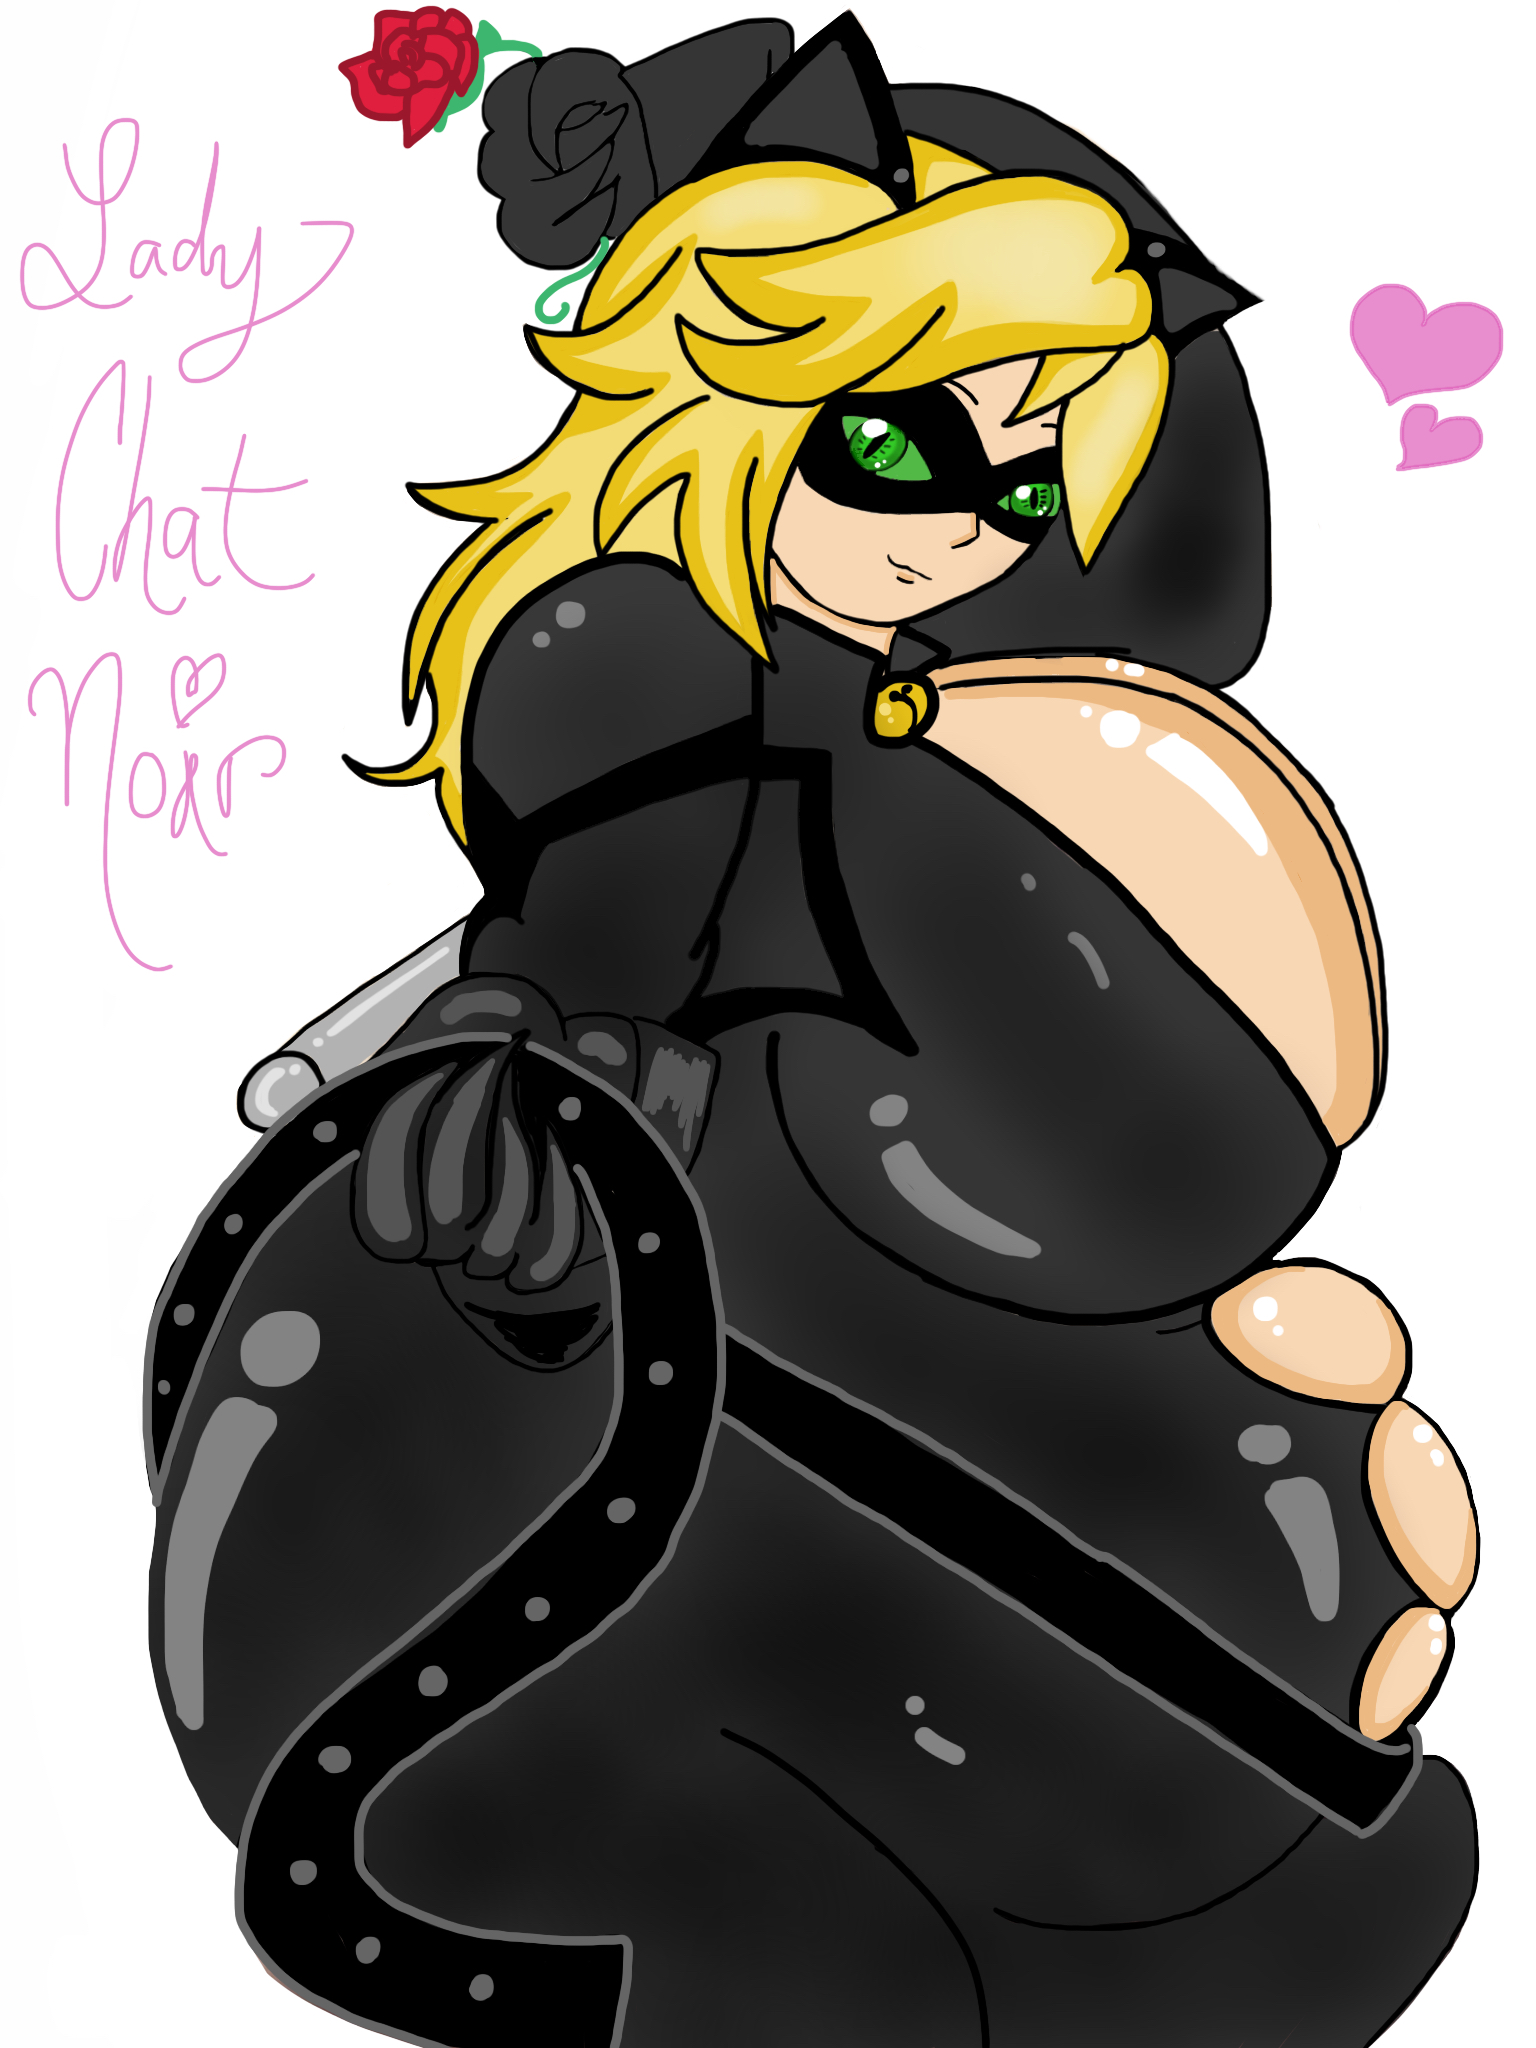 Chubby Lady Chat Noir By Chibiana26 On DeviantArt.